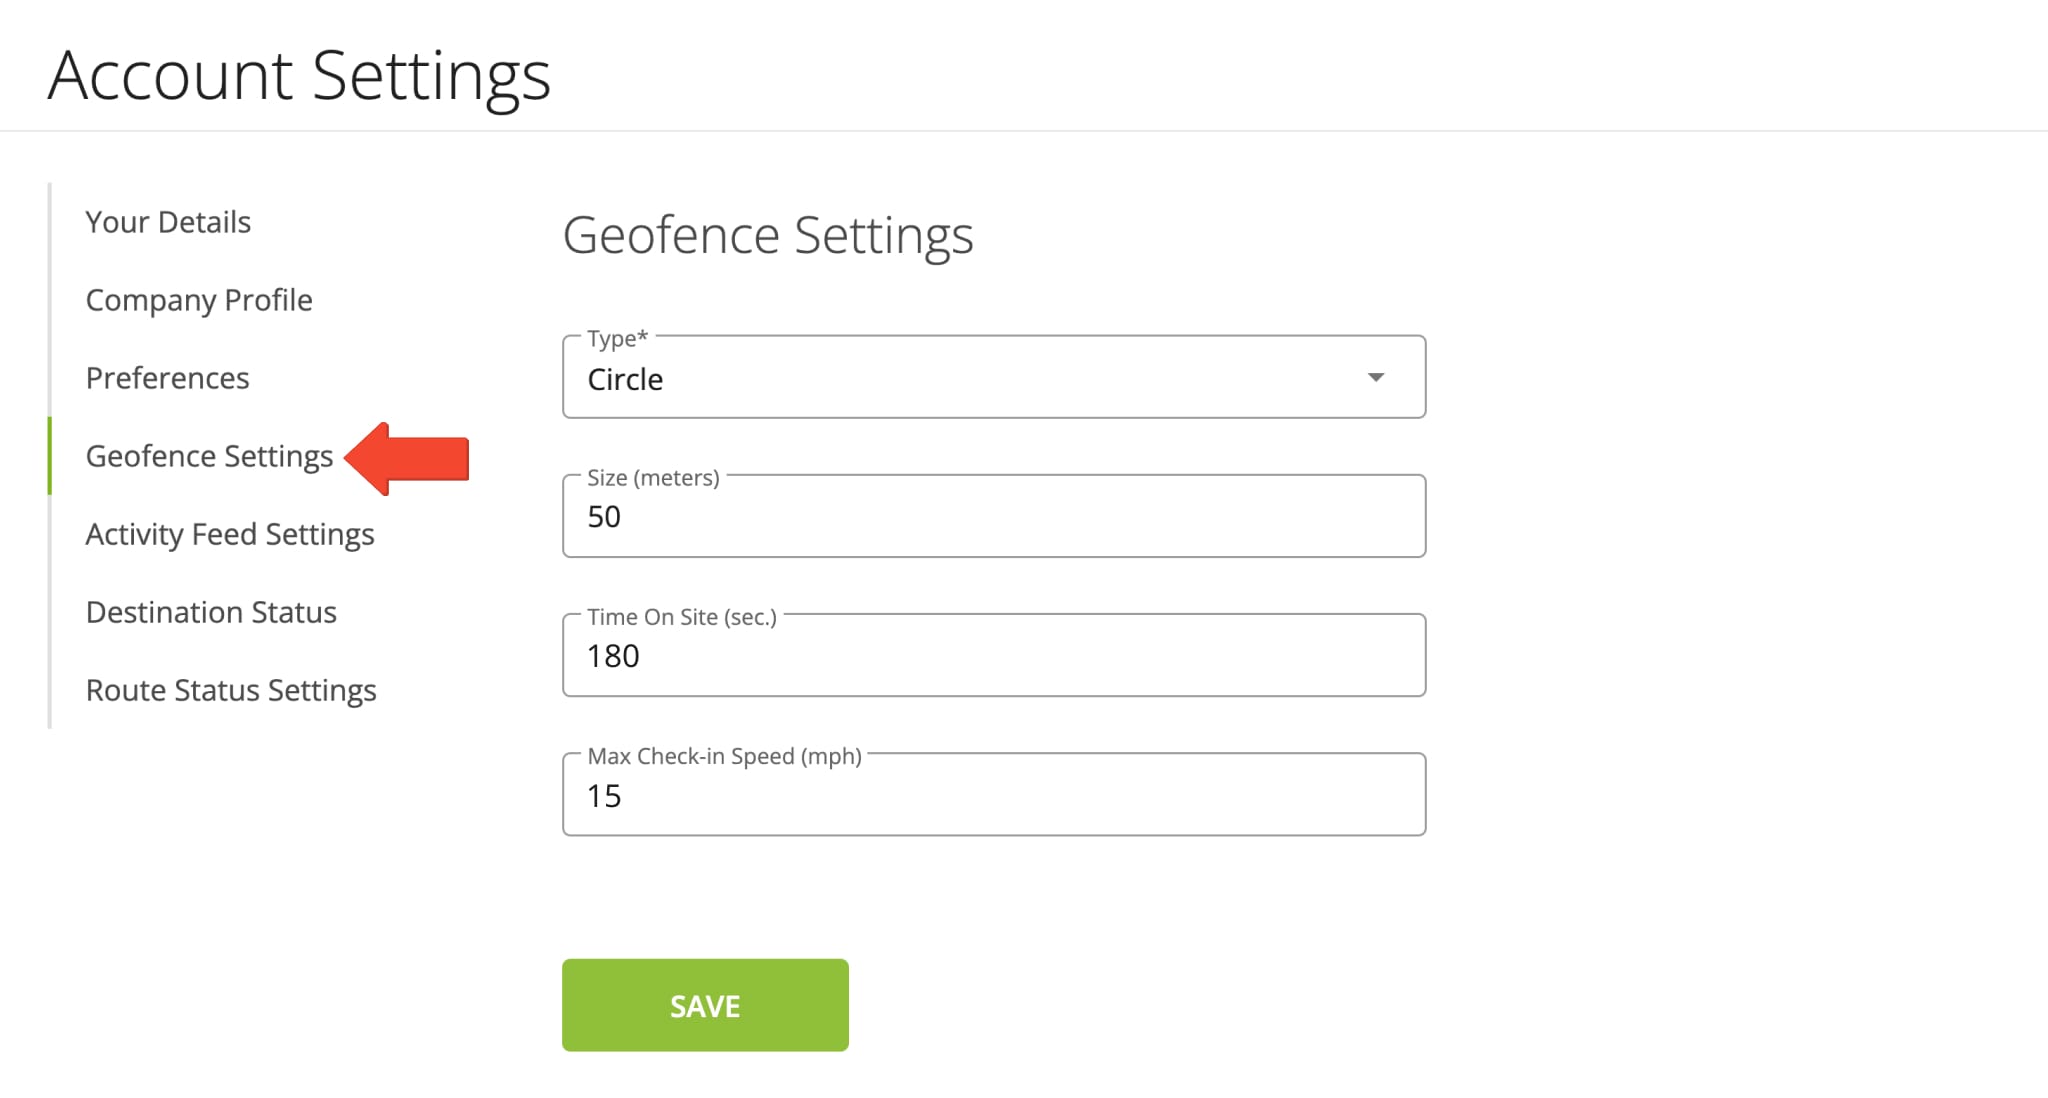 Enable geofencing and customize geofence settings on your Route4Me account.